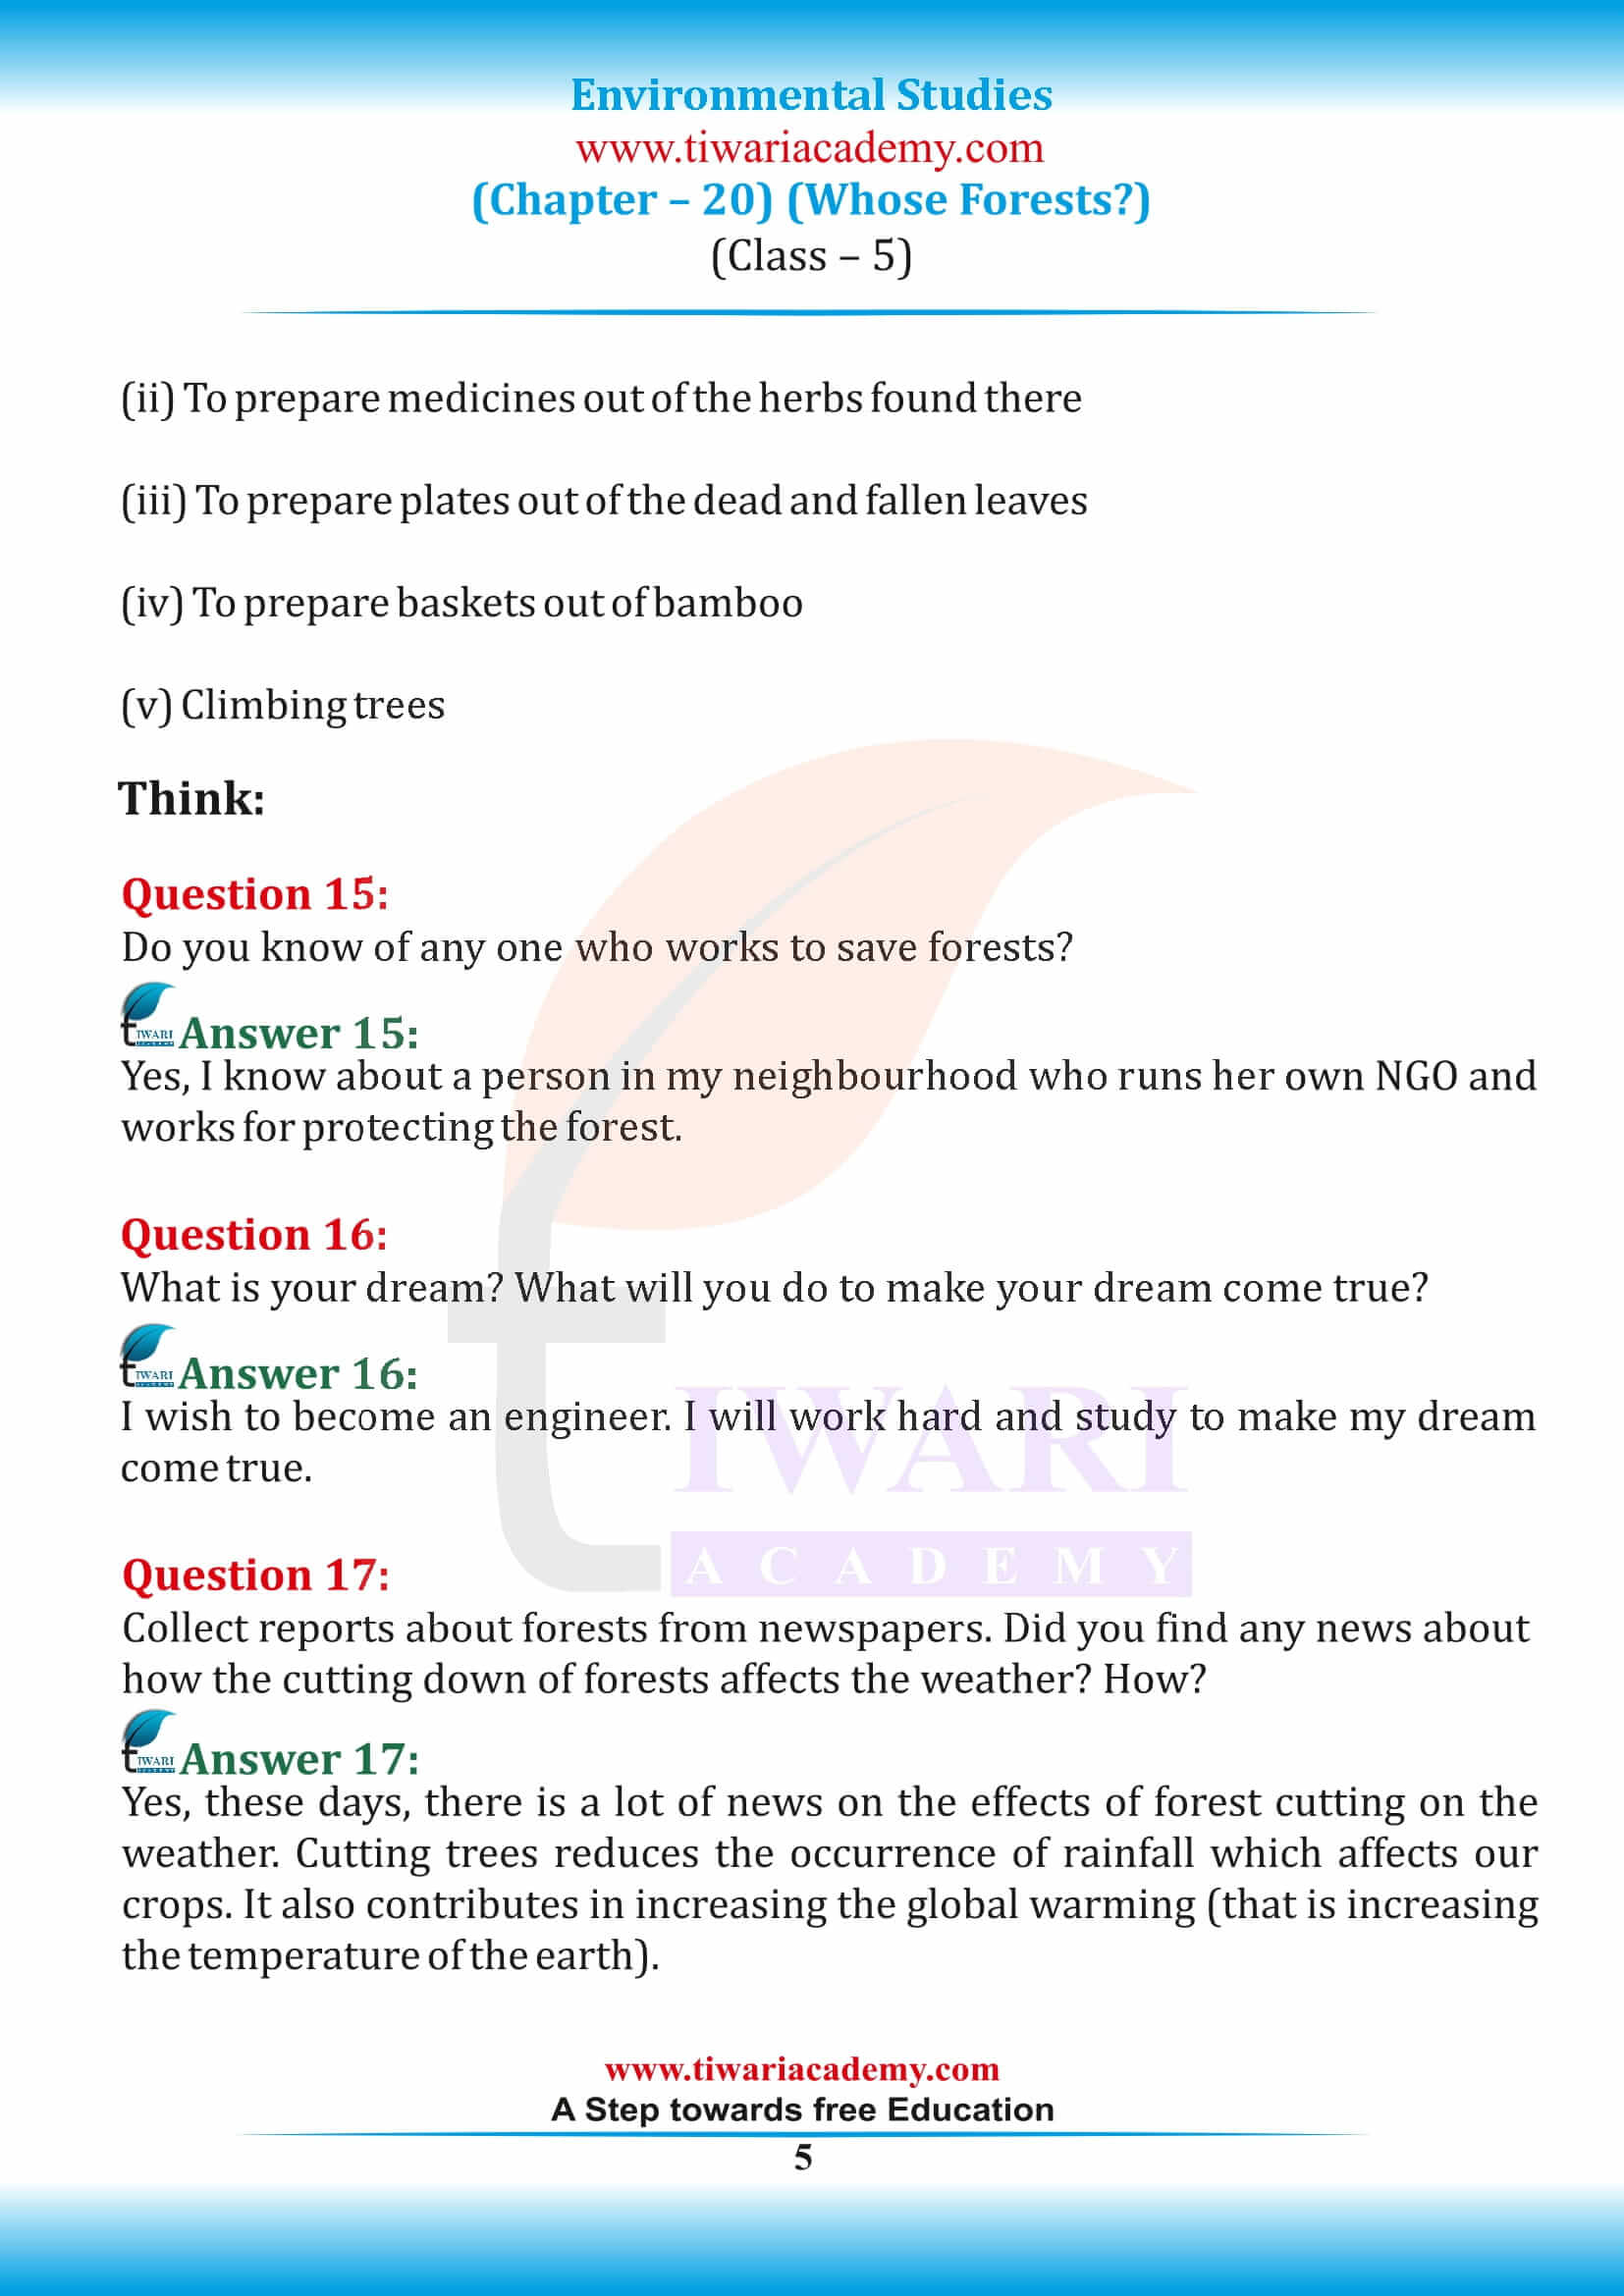 NCERT Solutions for Class 5 EVS Chapter 20 free download